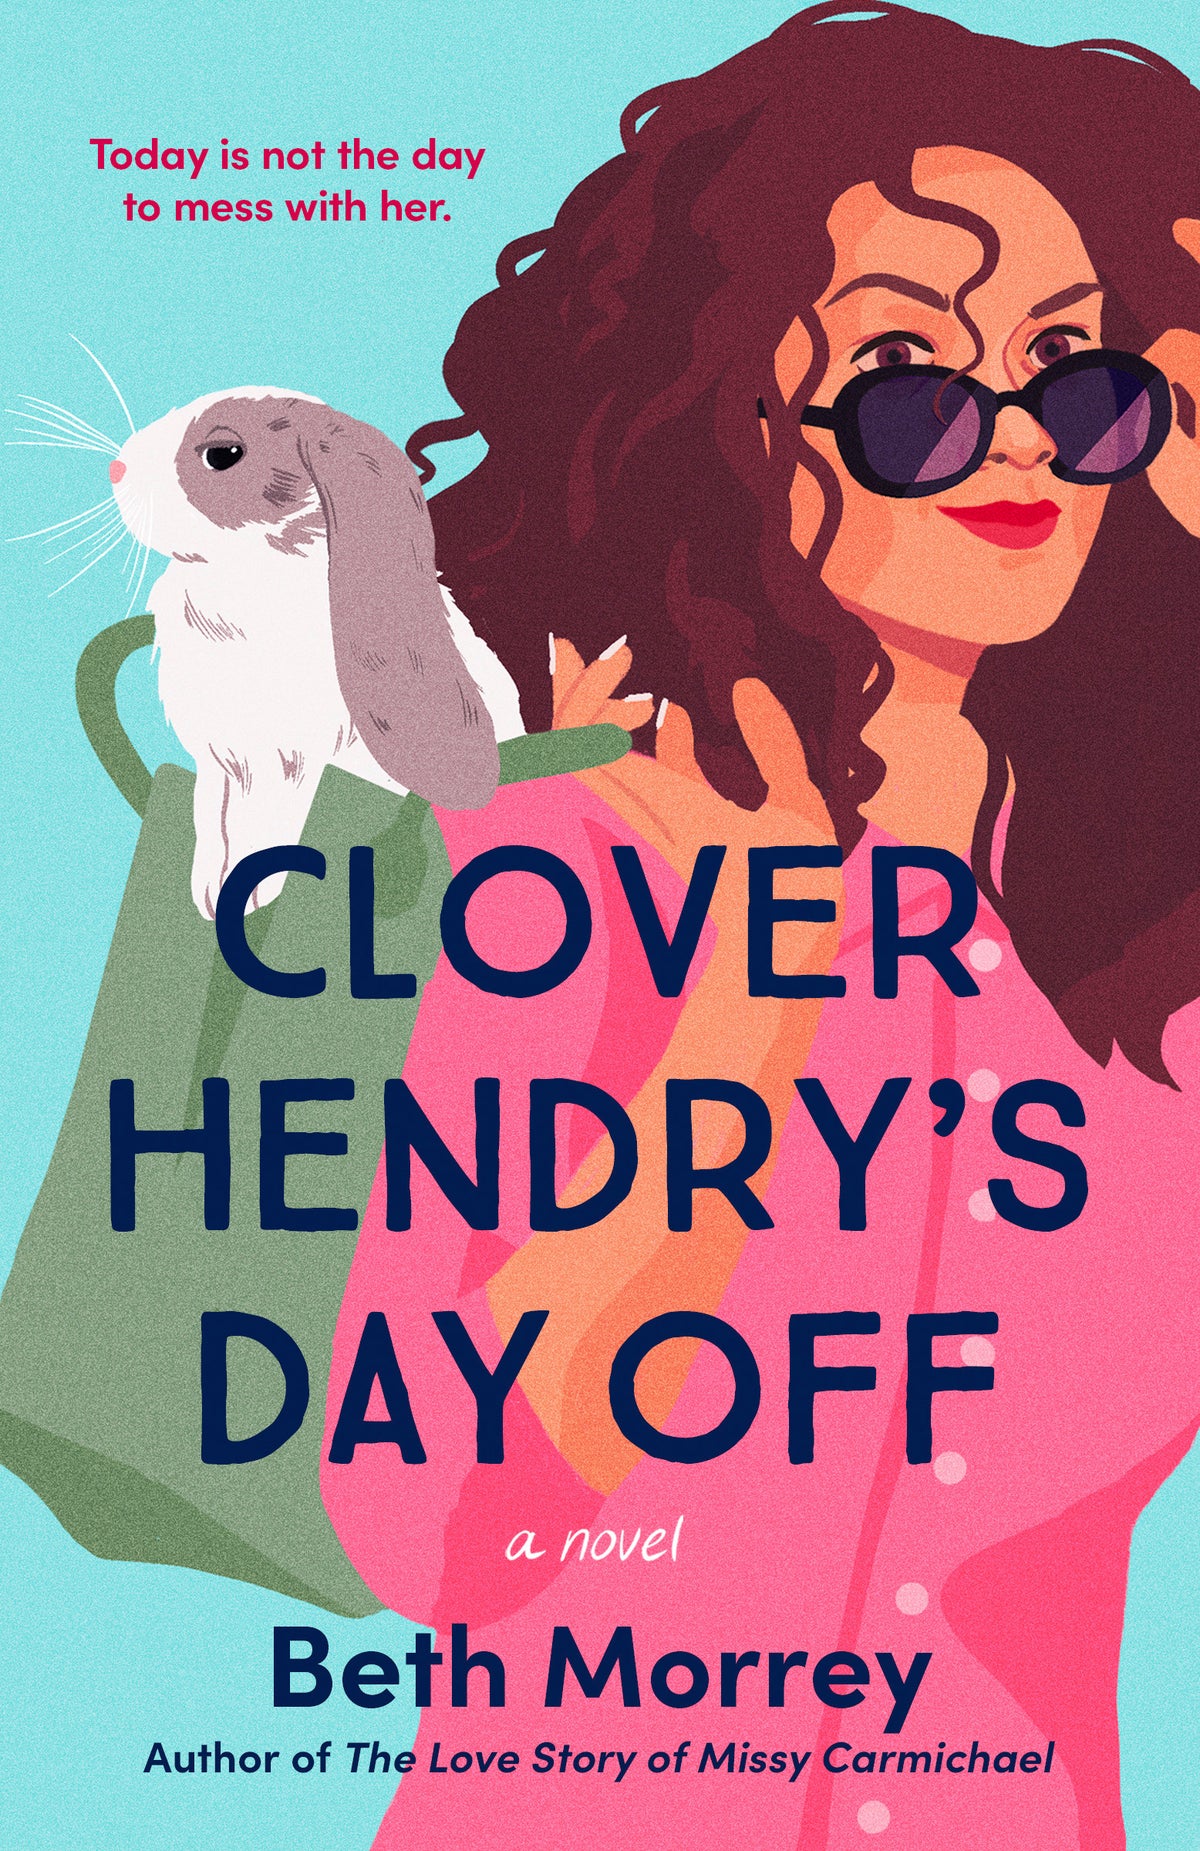 Book Review: 'Clover Hendry's Day Off' is an infectious, Ferris Bueller-inspired 24-hour adventure